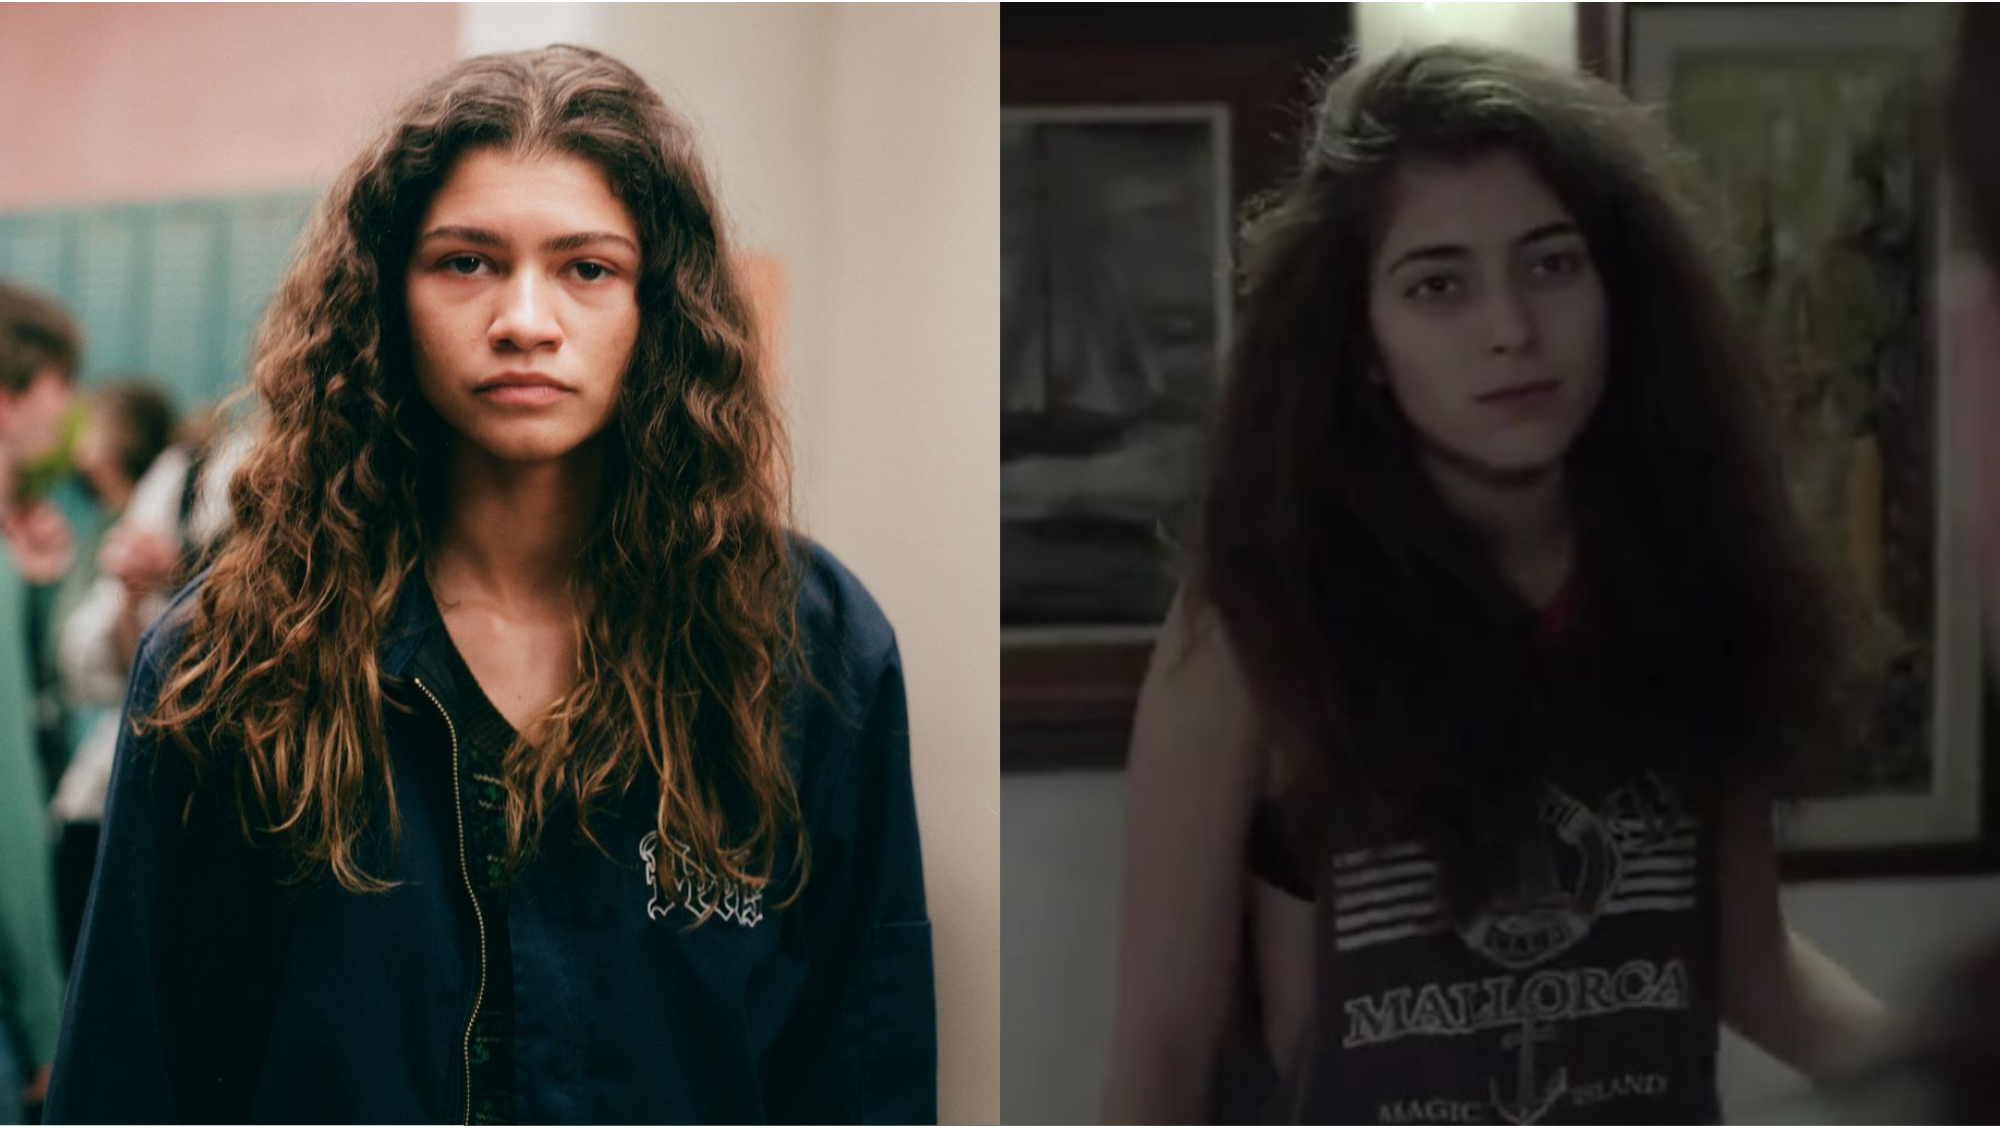 Zendaya as Rue from Euphoria (U.S) on the left and Roni as Hofit in Euphoria (Israel) on the right.